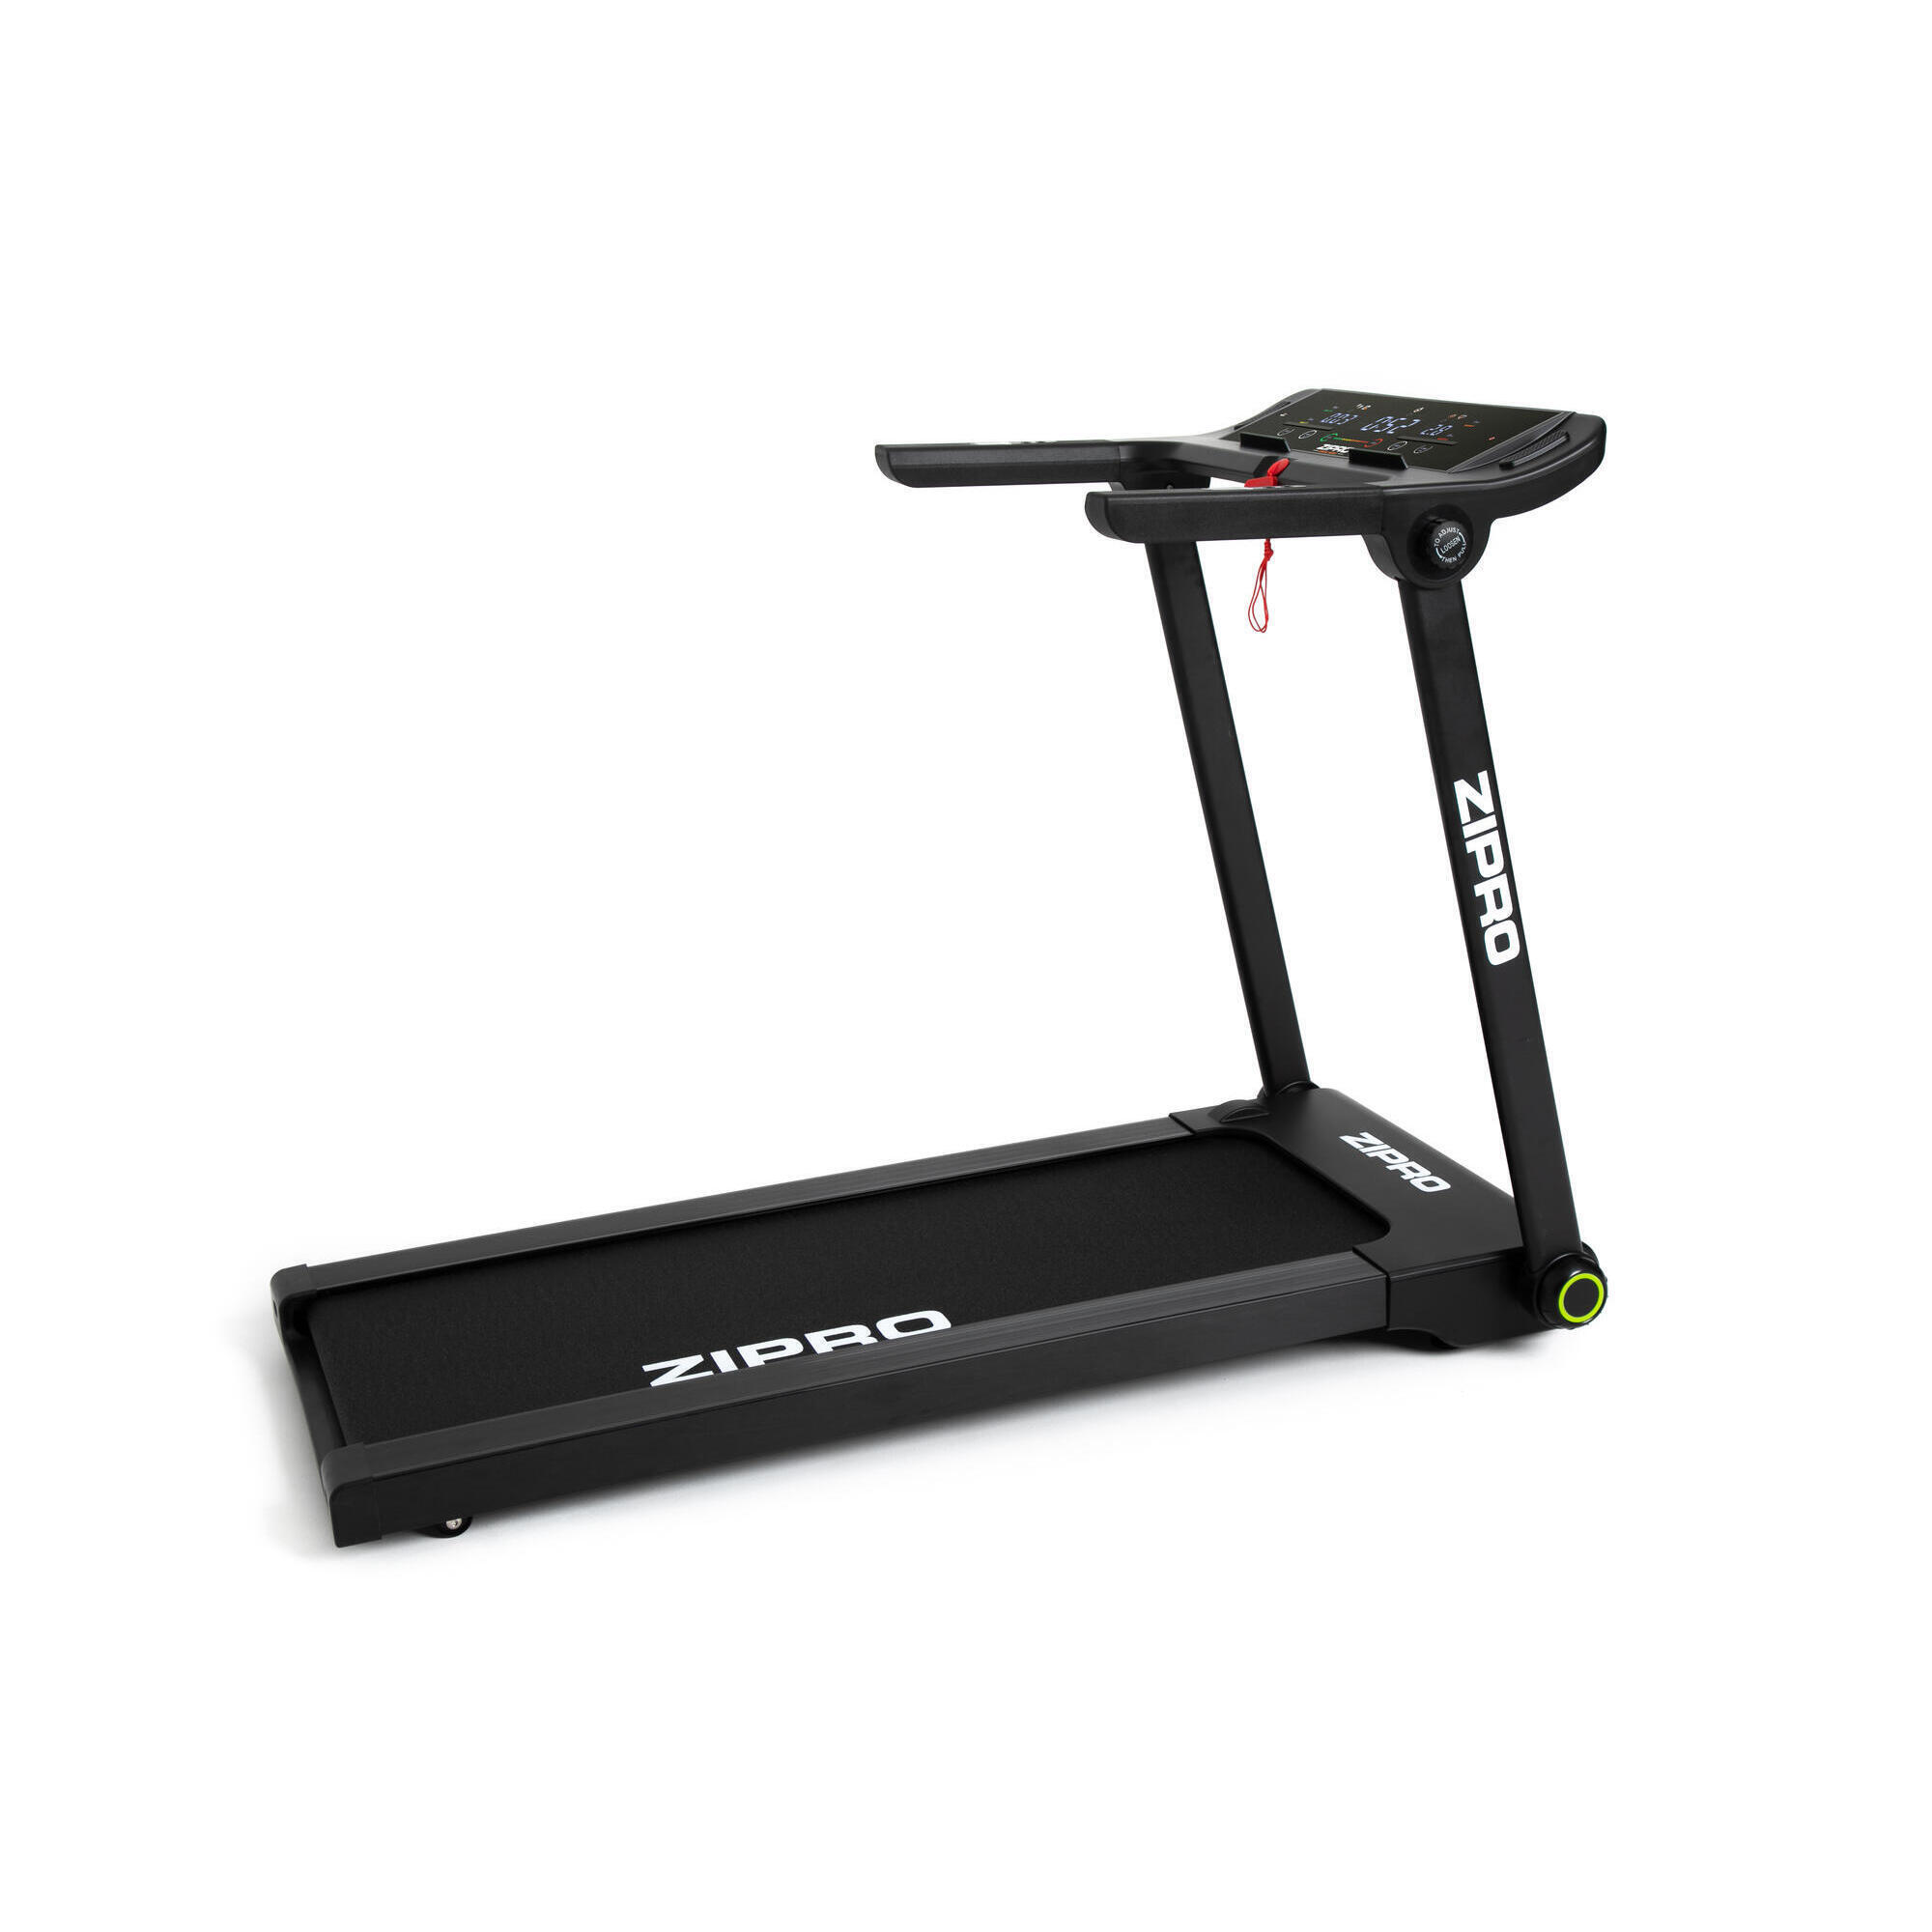 Cinta Correr Movement Rt G3 Led Profesional 18km/h 150kg Fit